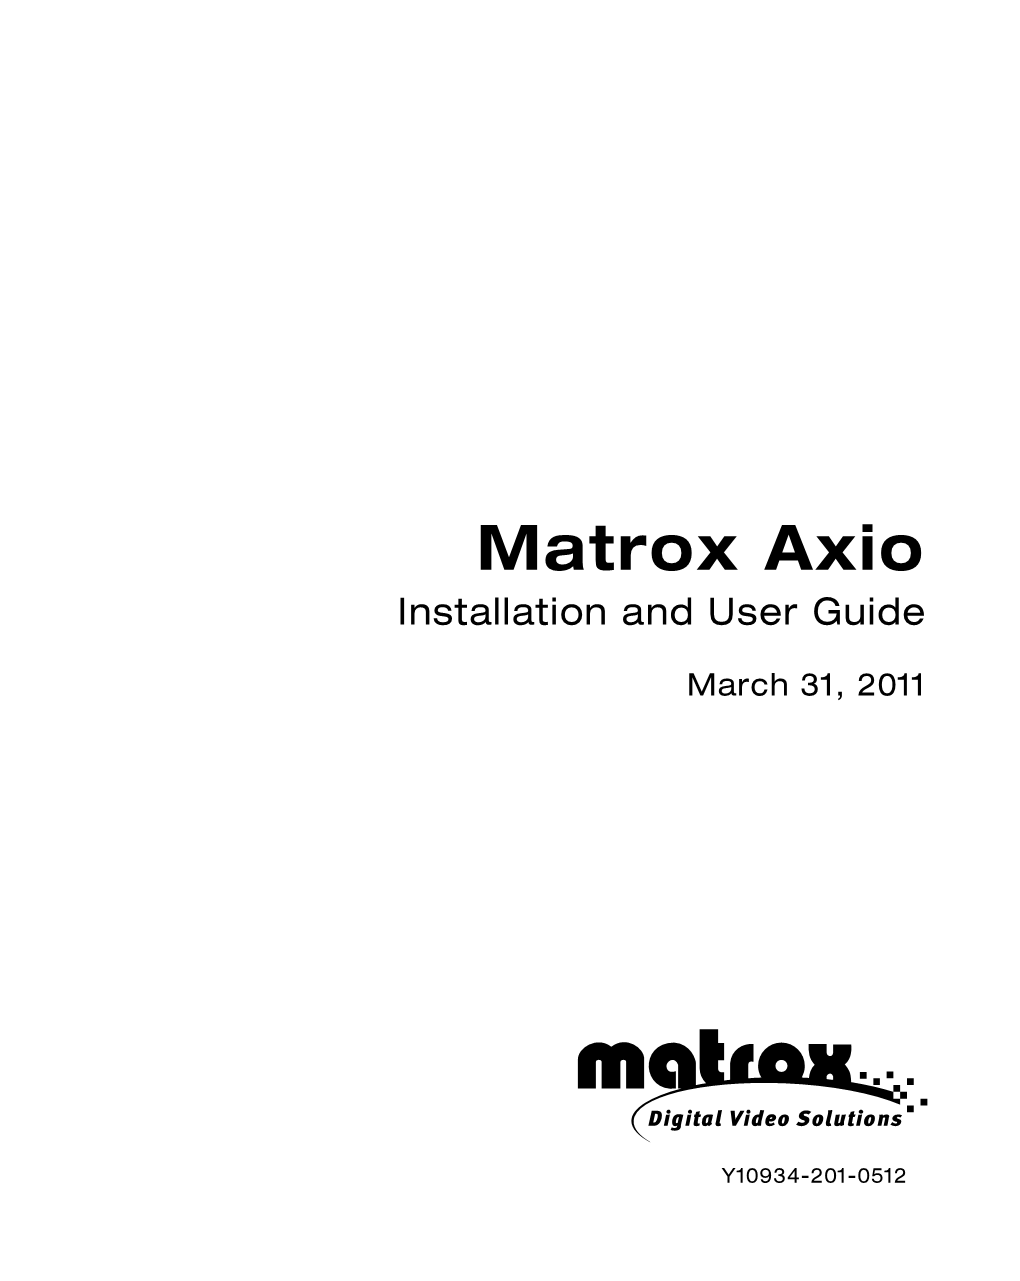 Matrox Axio Installation and User Guide